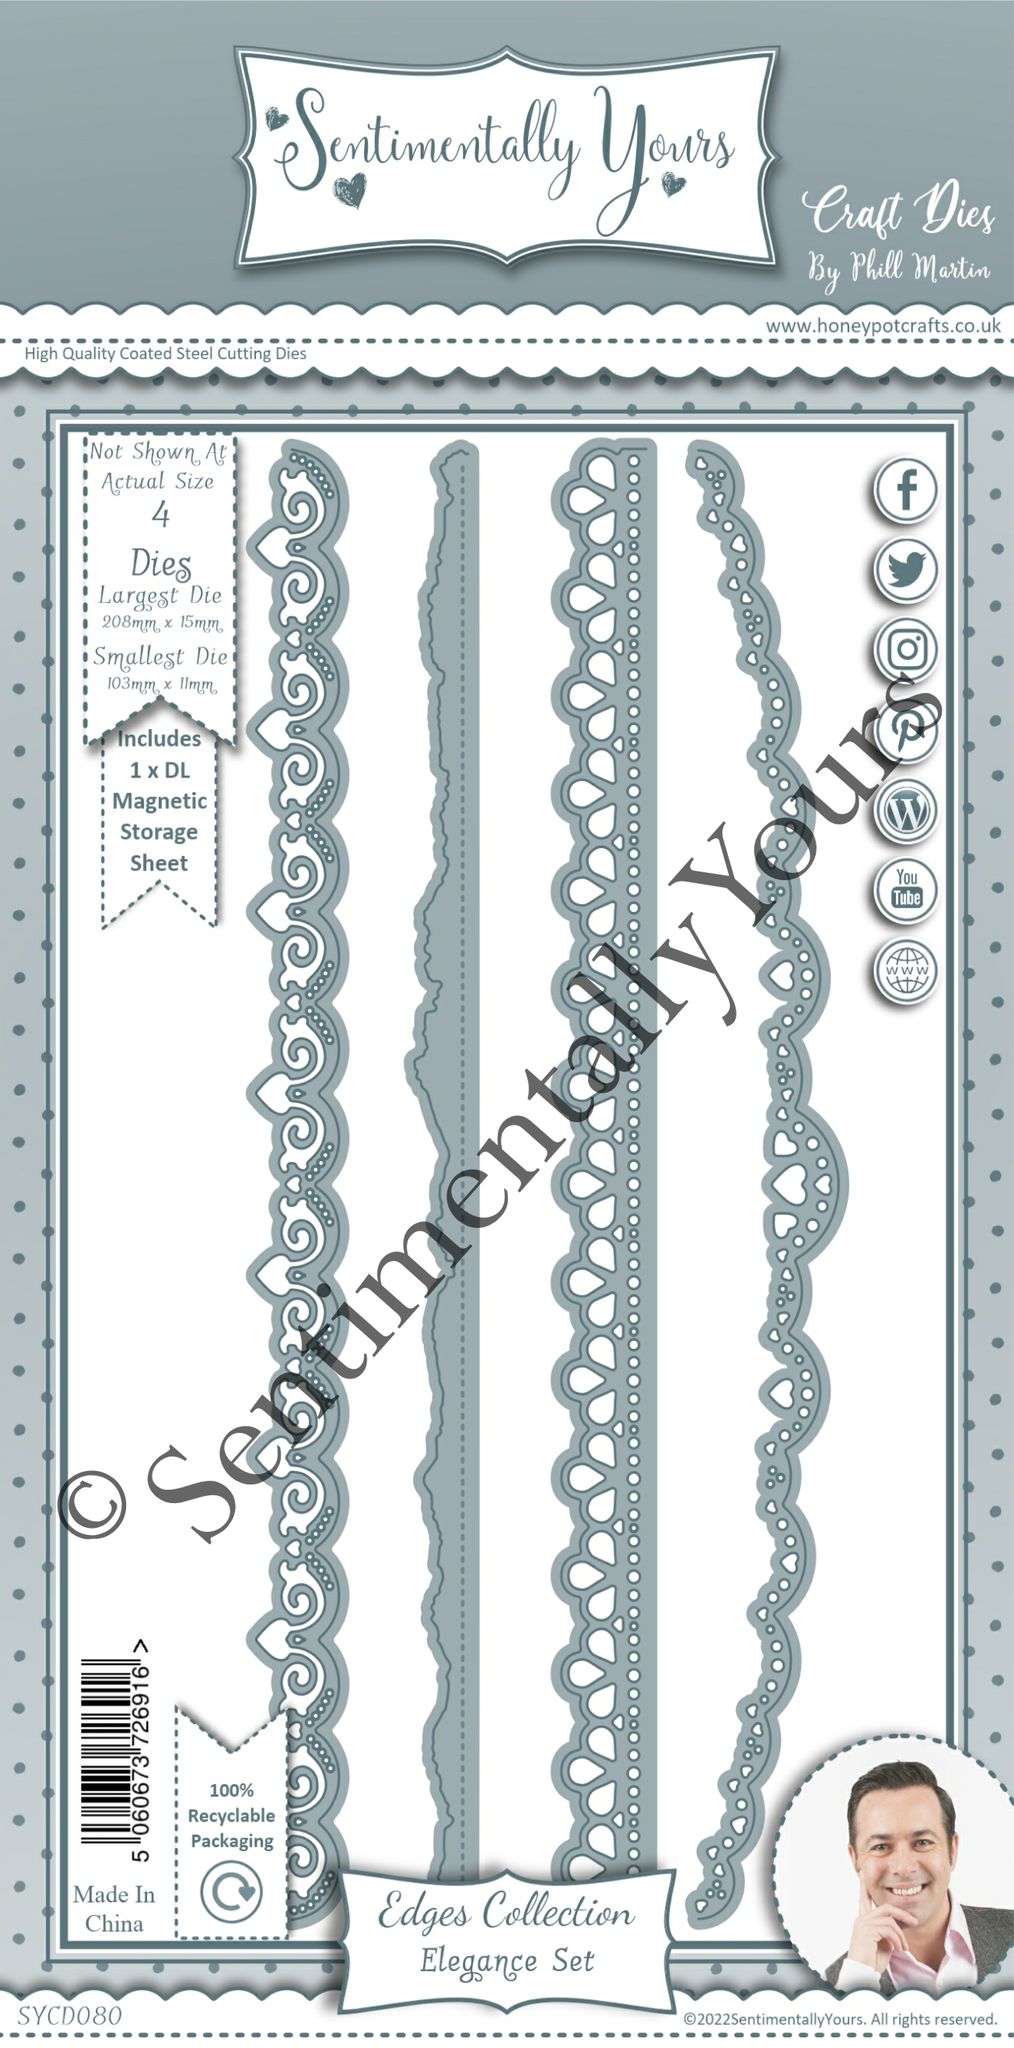 Phill Martin Sentimentally Yours Edges Collection - Elegance Set